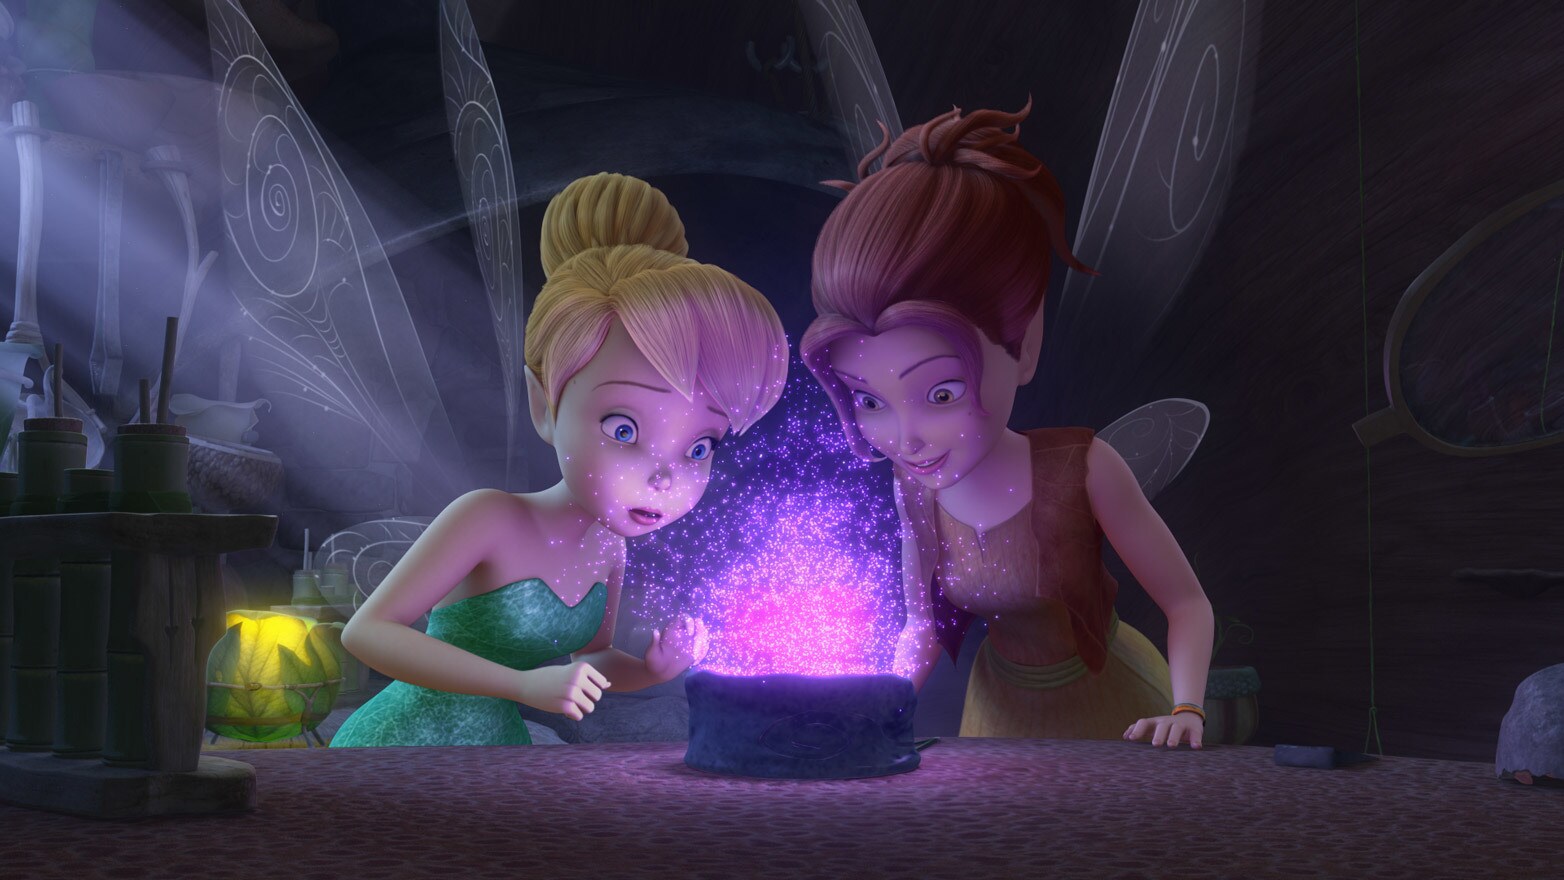 Zarina and Tinker Bell create a new kind of pixie dust